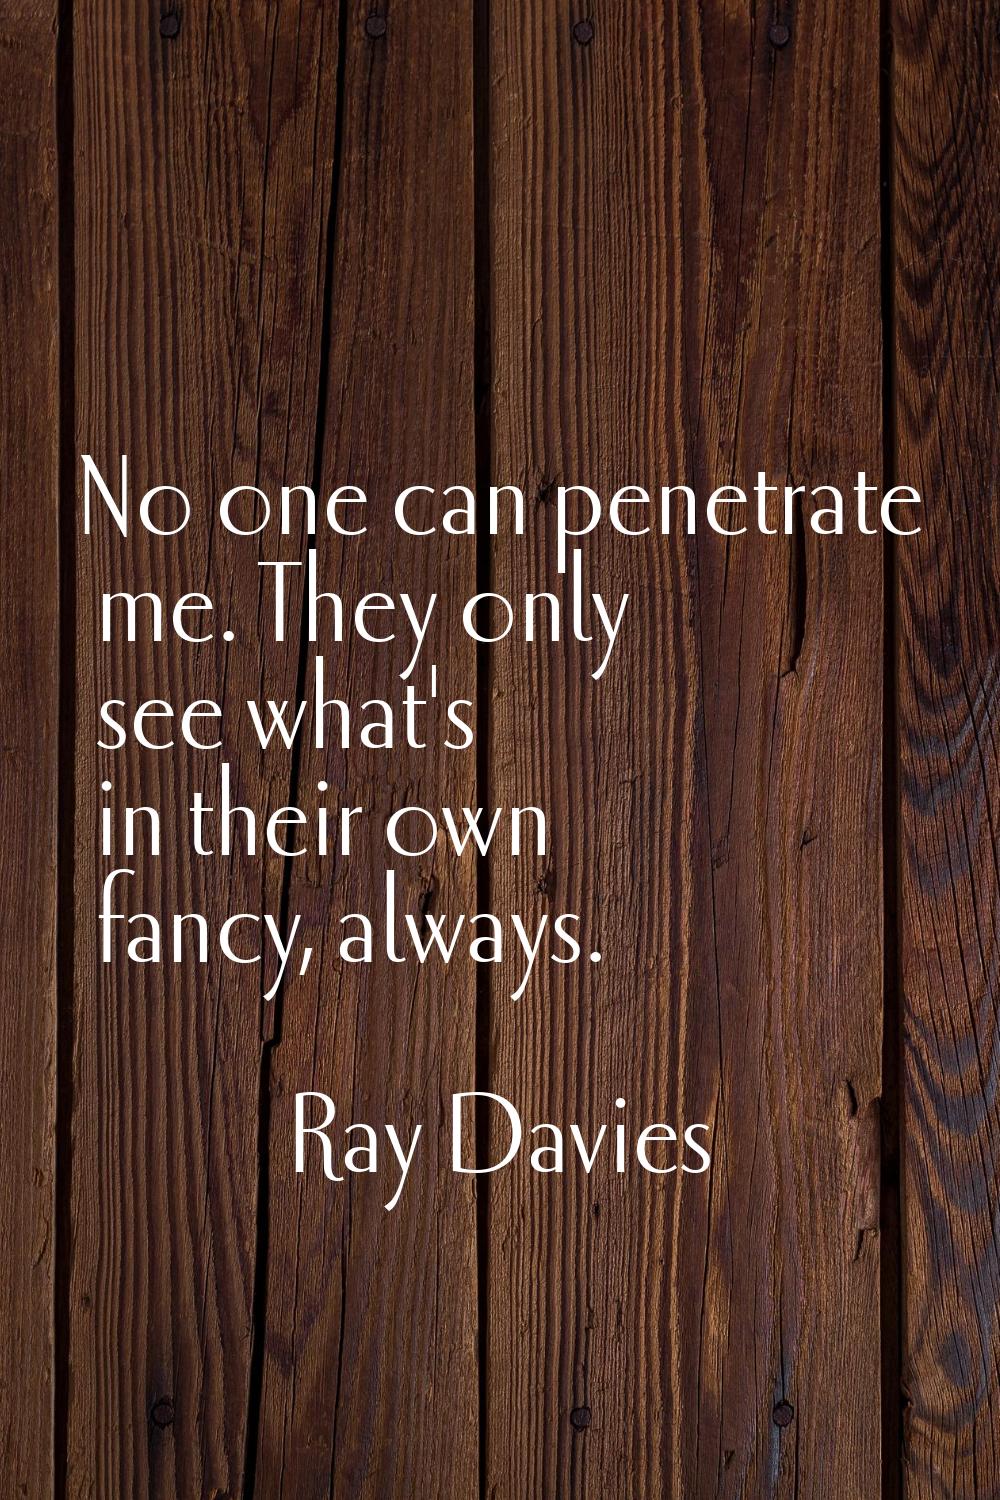 No one can penetrate me. They only see what's in their own fancy, always.